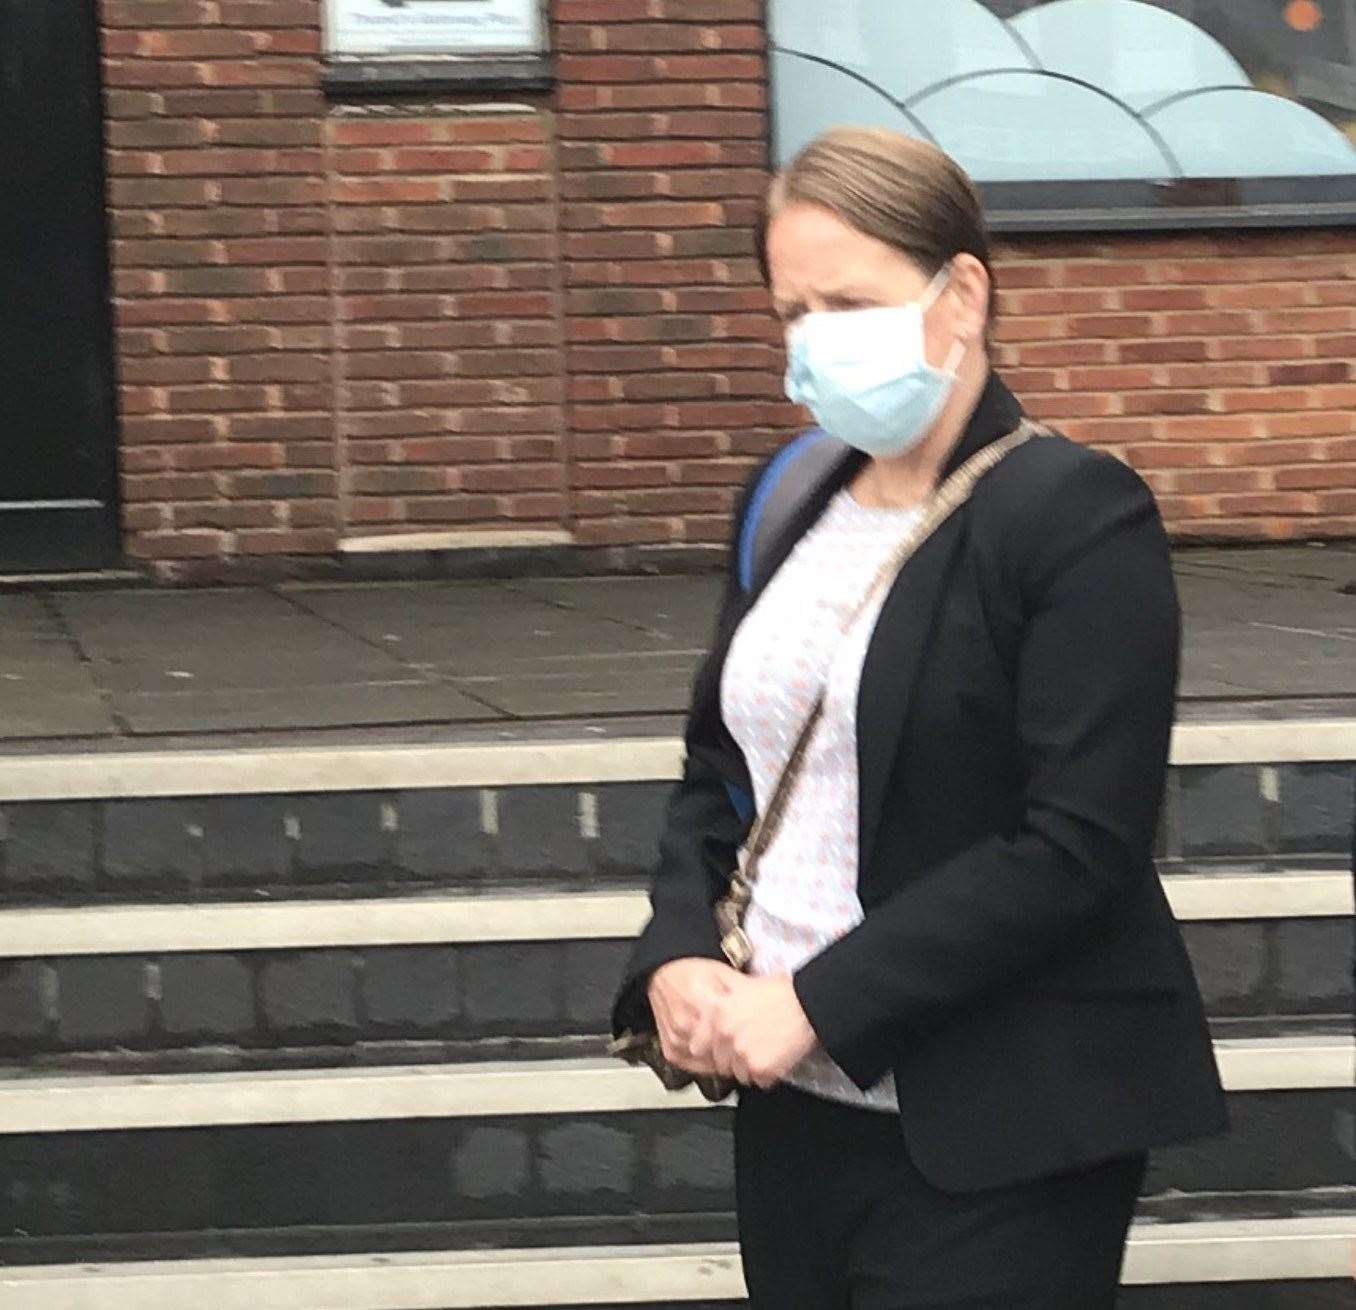 Carly Dear has been convicted of grooming a girl and sexually assaulting her